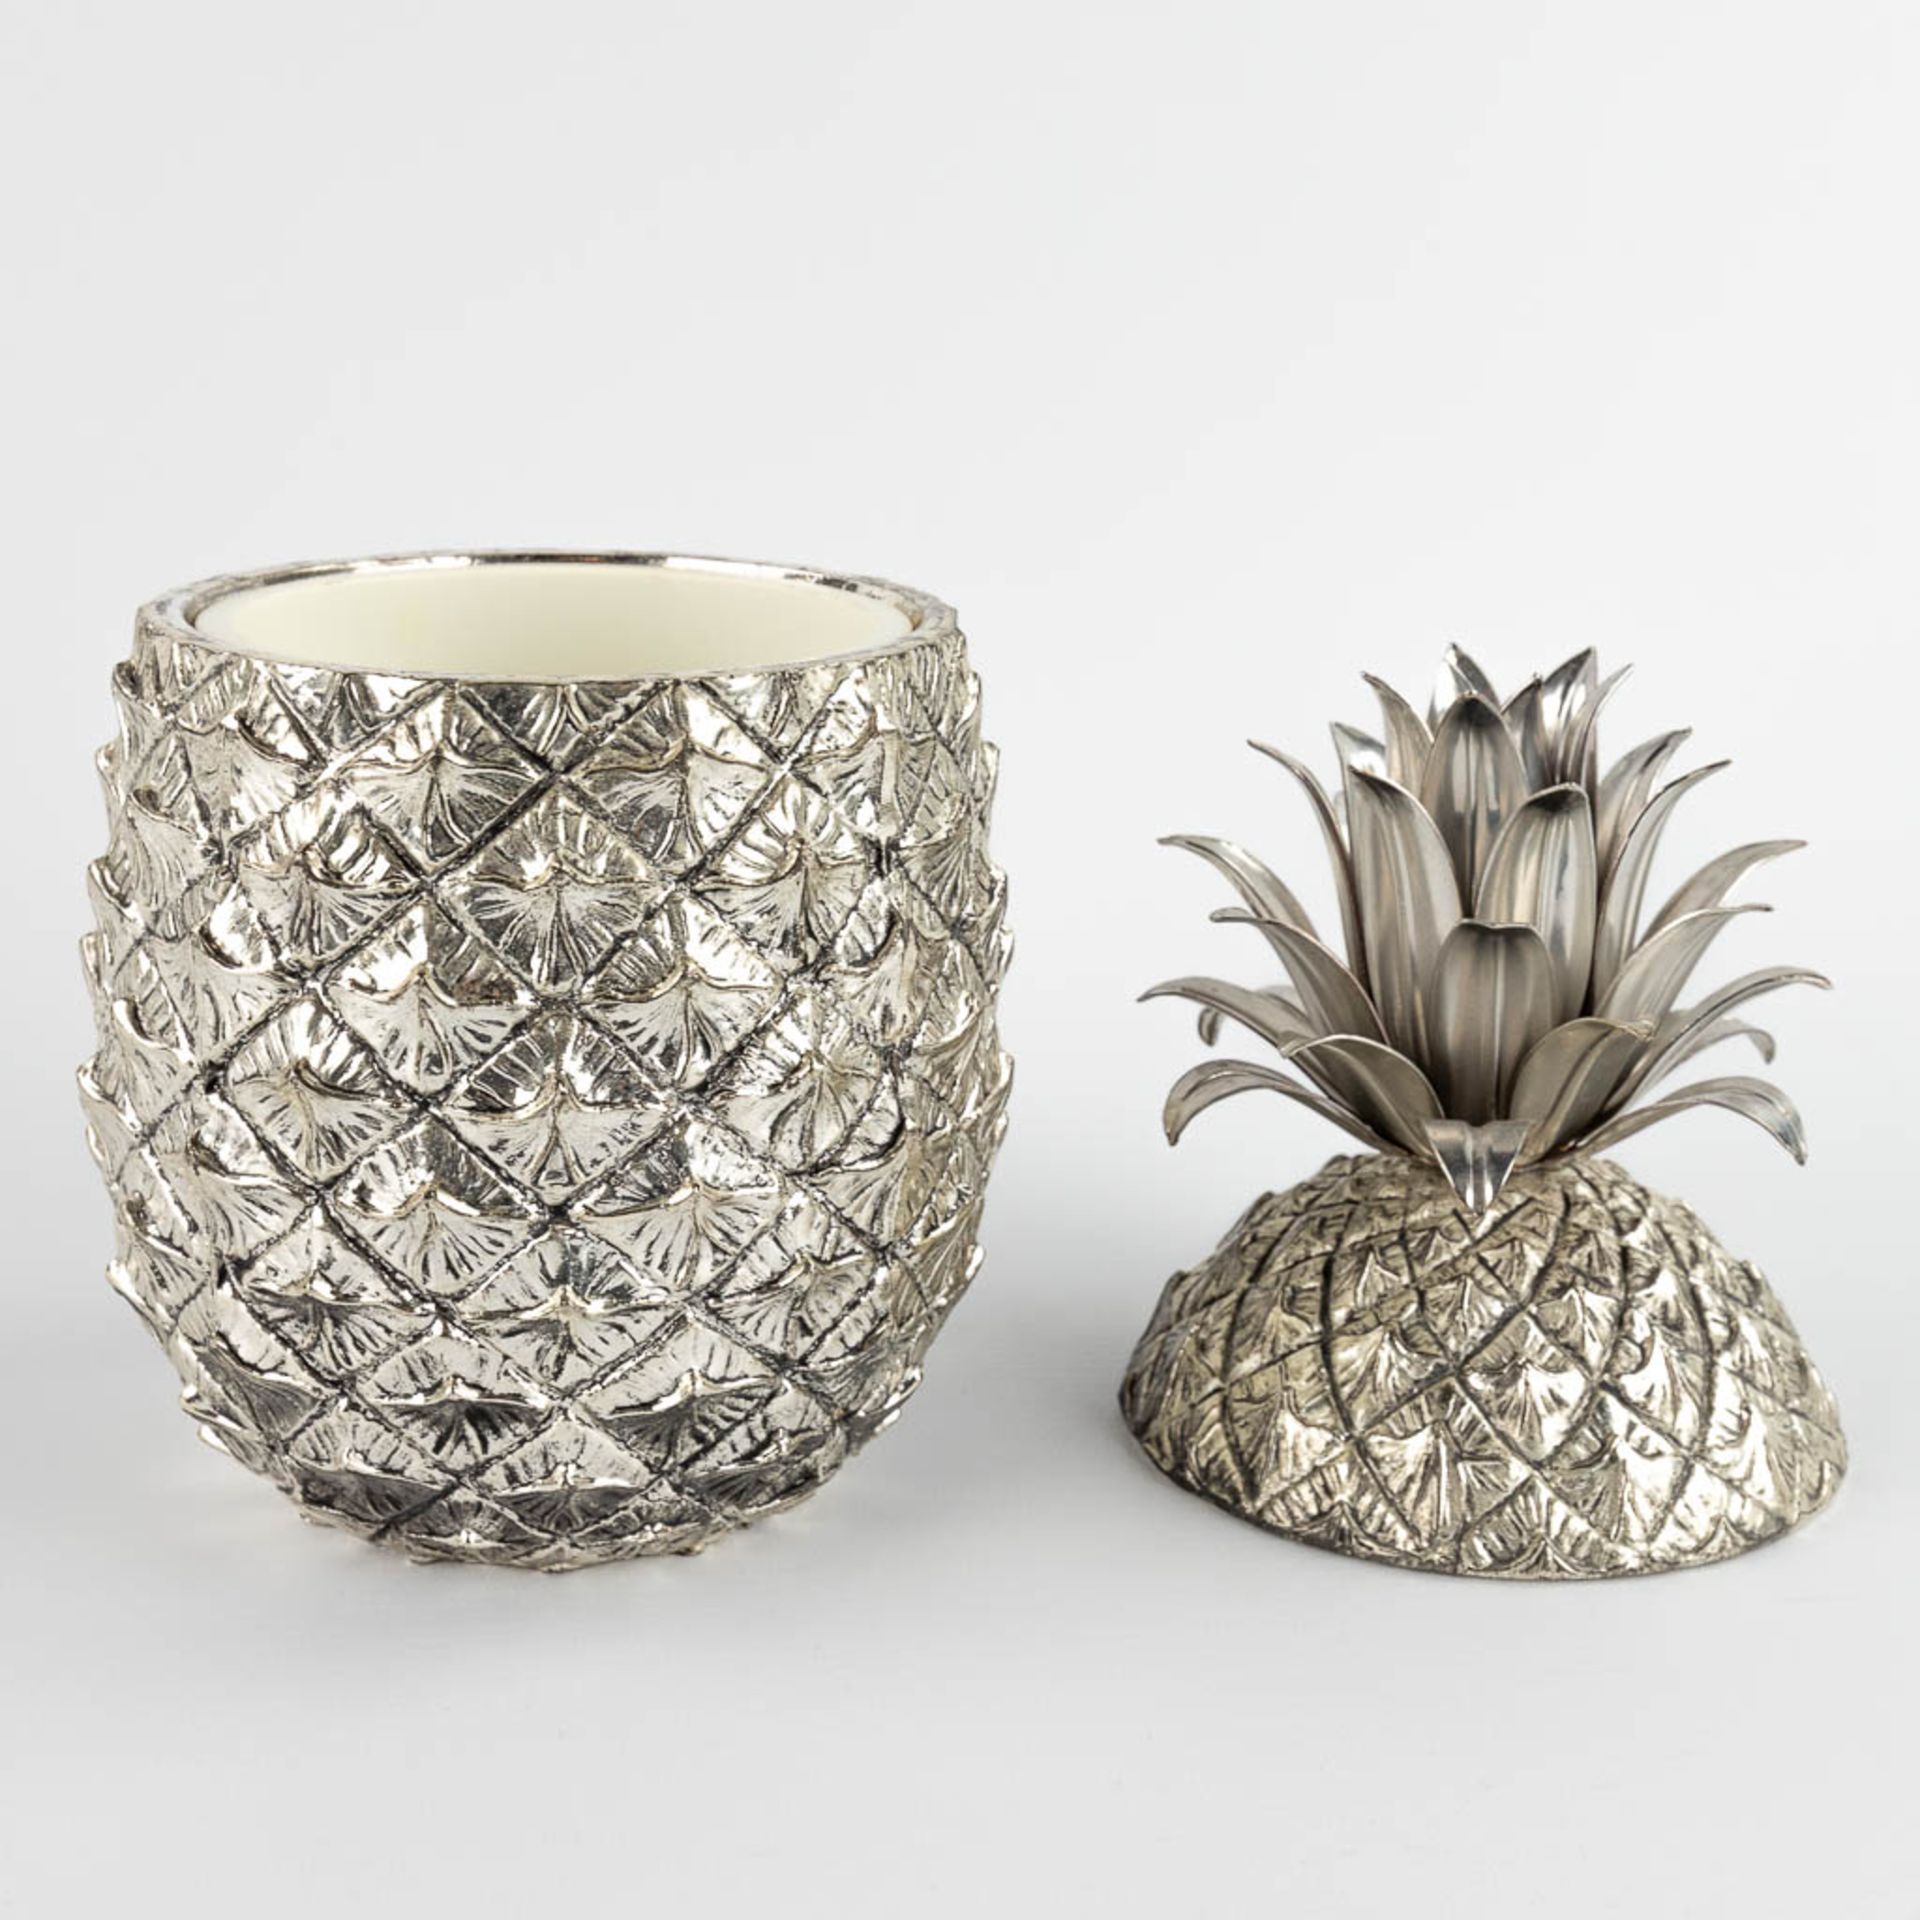 Mauro MANETTI (1946) 'Pineapple' an ice pail. (H:26 x D:14 cm) - Image 10 of 13